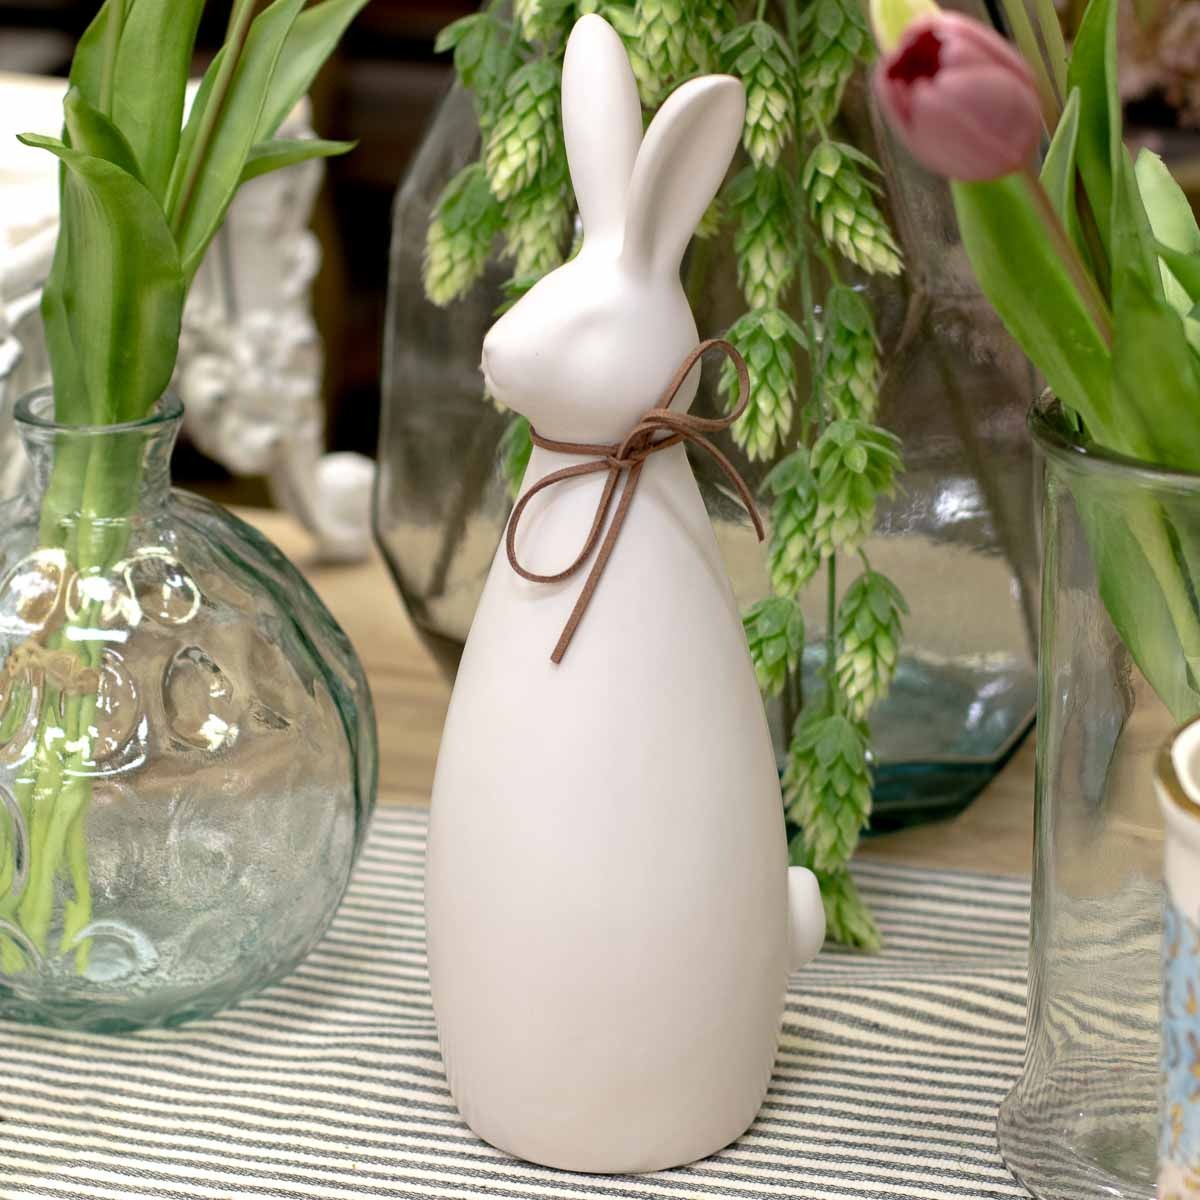 Figurine Bunny White with Bow 12"